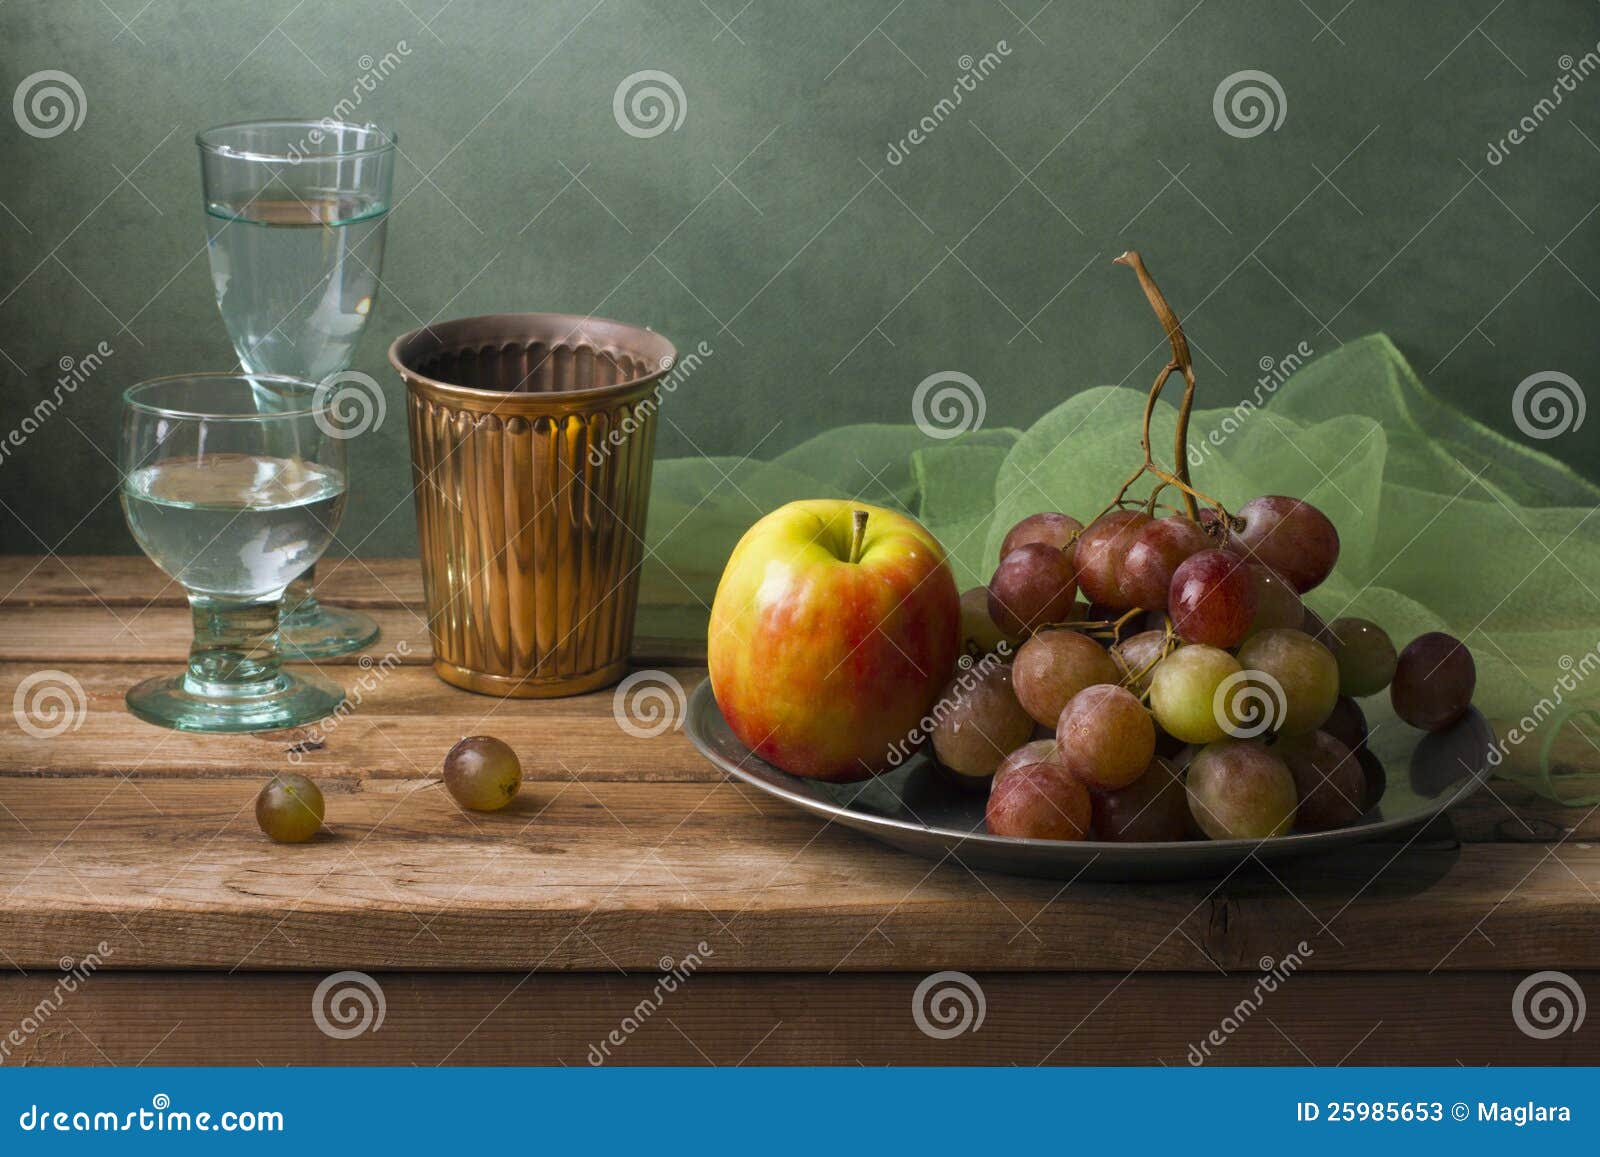 still life with fruits and glasses of water